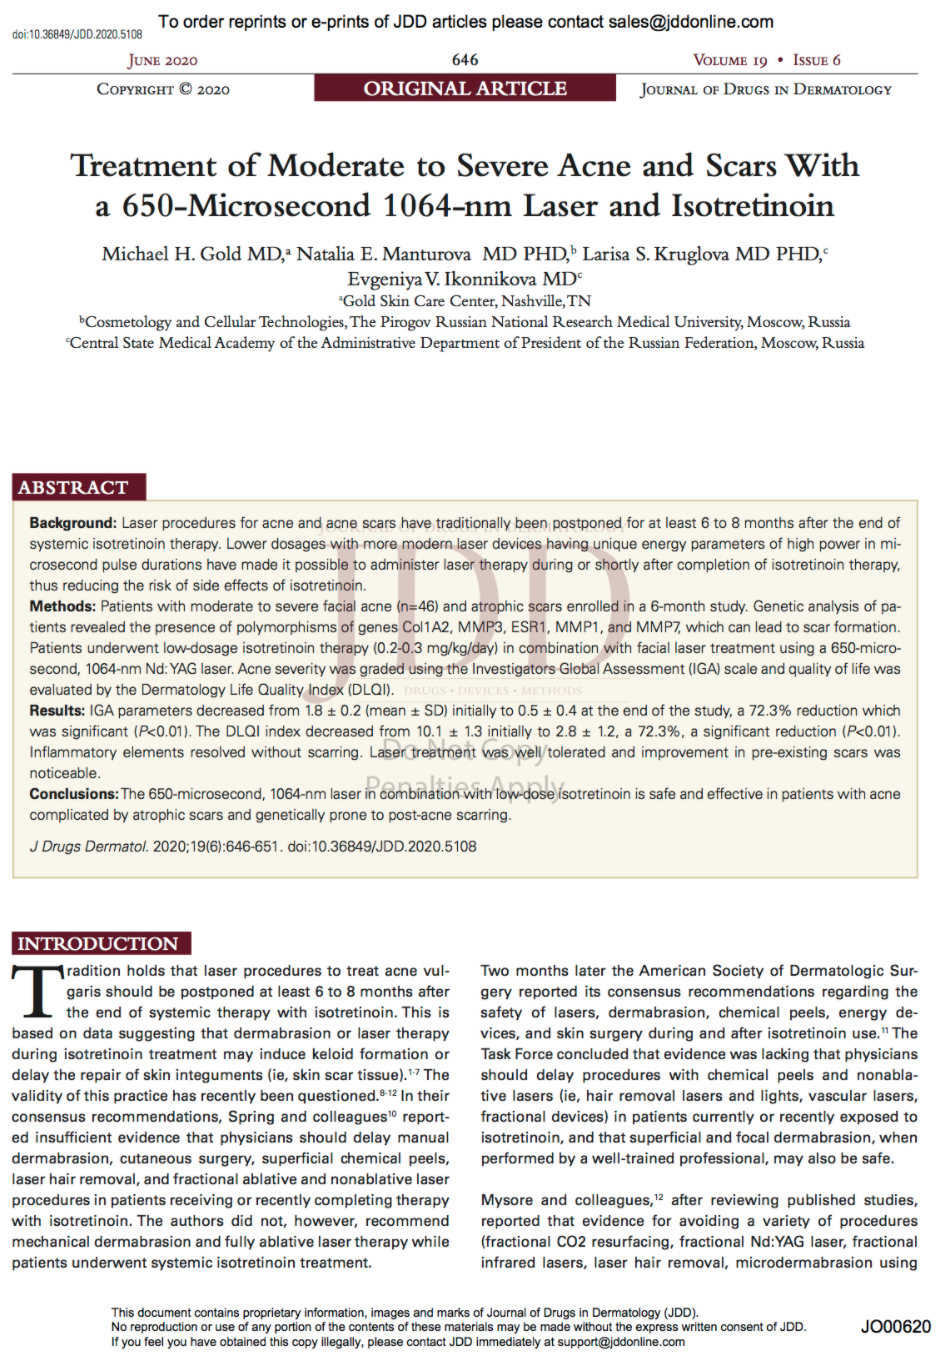 Treatment of Moderate to Severe Acne and Scars With a 650-Microsecond  1064-nm Laser and Isotretinoin — Belle